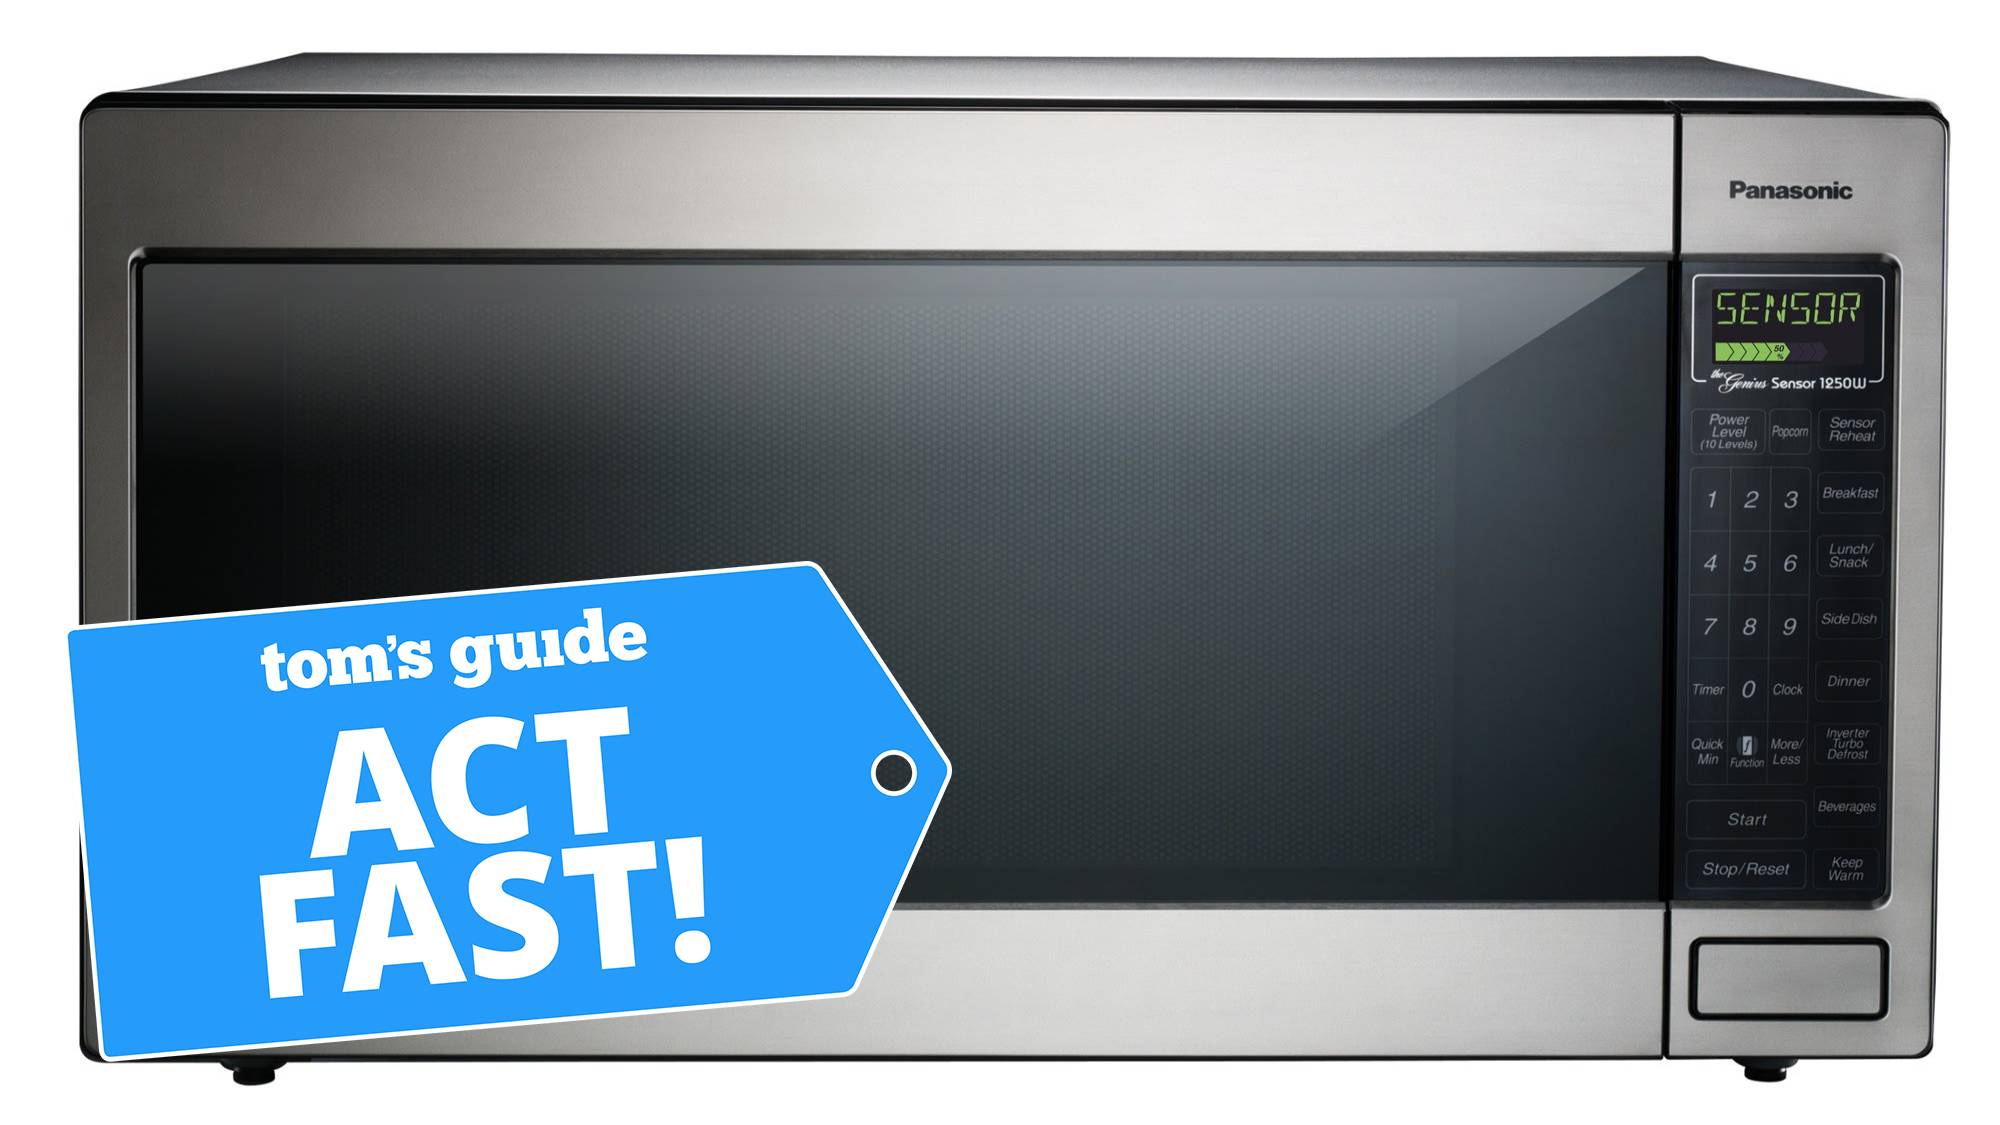 Panasonic microwave with a Tom's Guide offer label